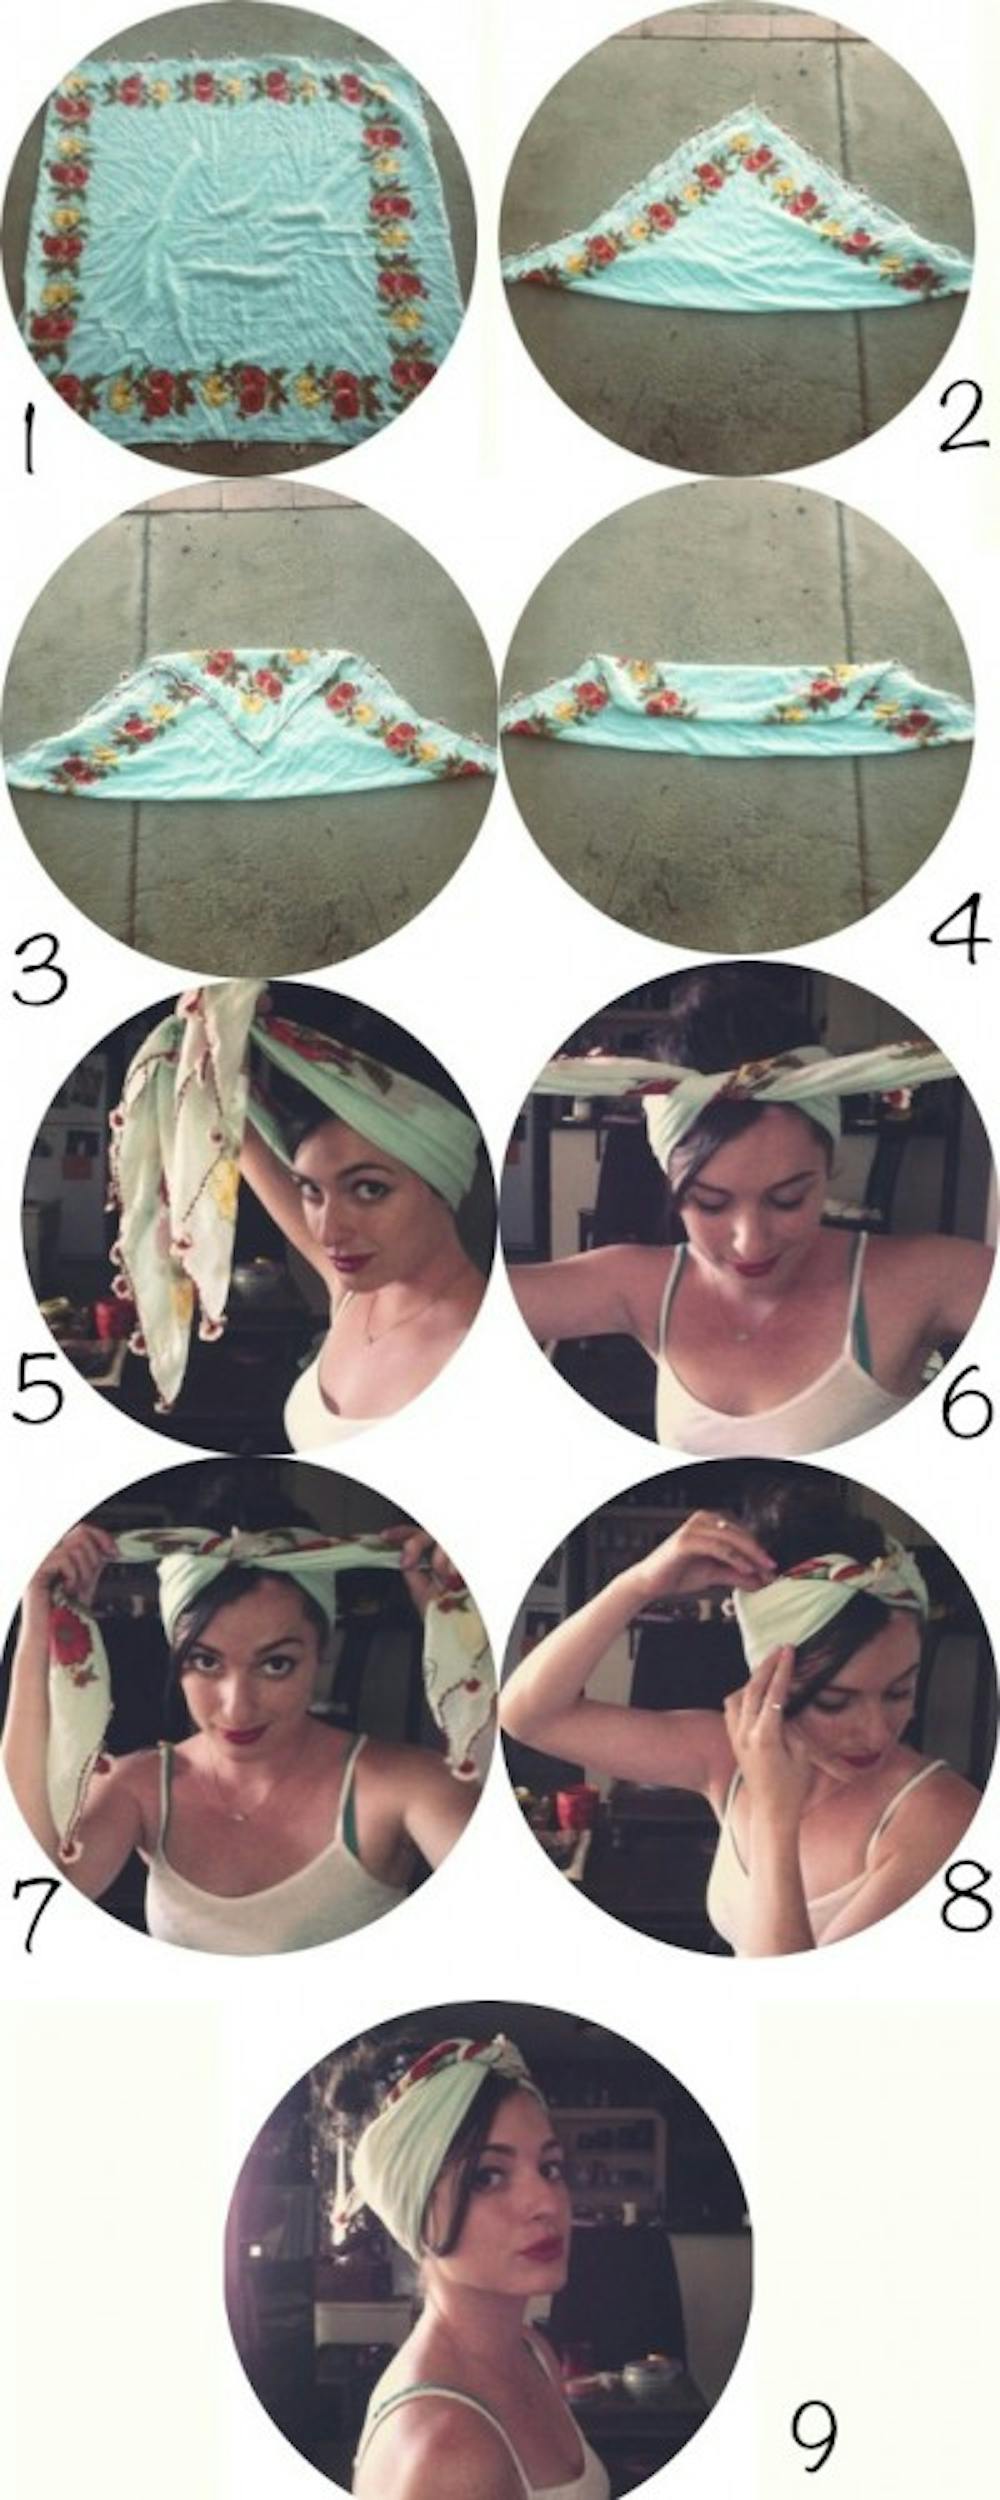 Step by step instructions for a DIY headscarf. Photos and collage by Gabi Nelson